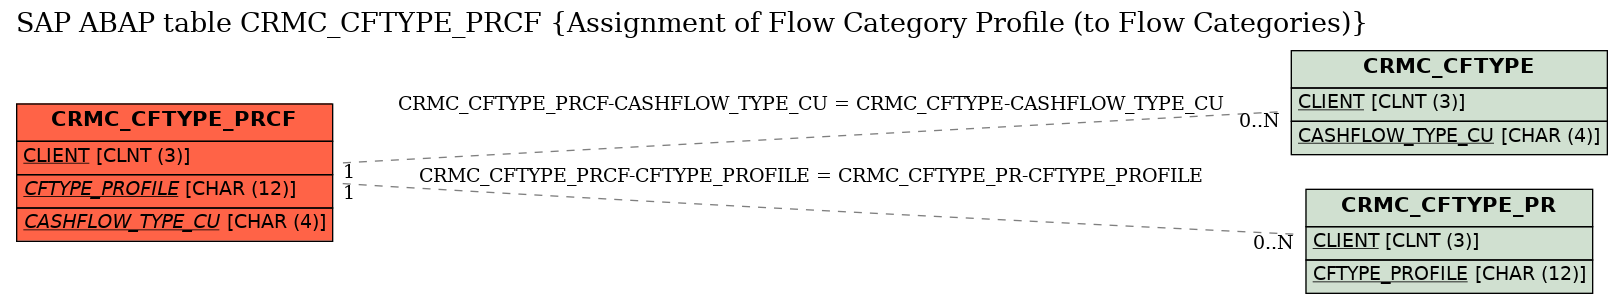 E-R Diagram for table CRMC_CFTYPE_PRCF (Assignment of Flow Category Profile (to Flow Categories))